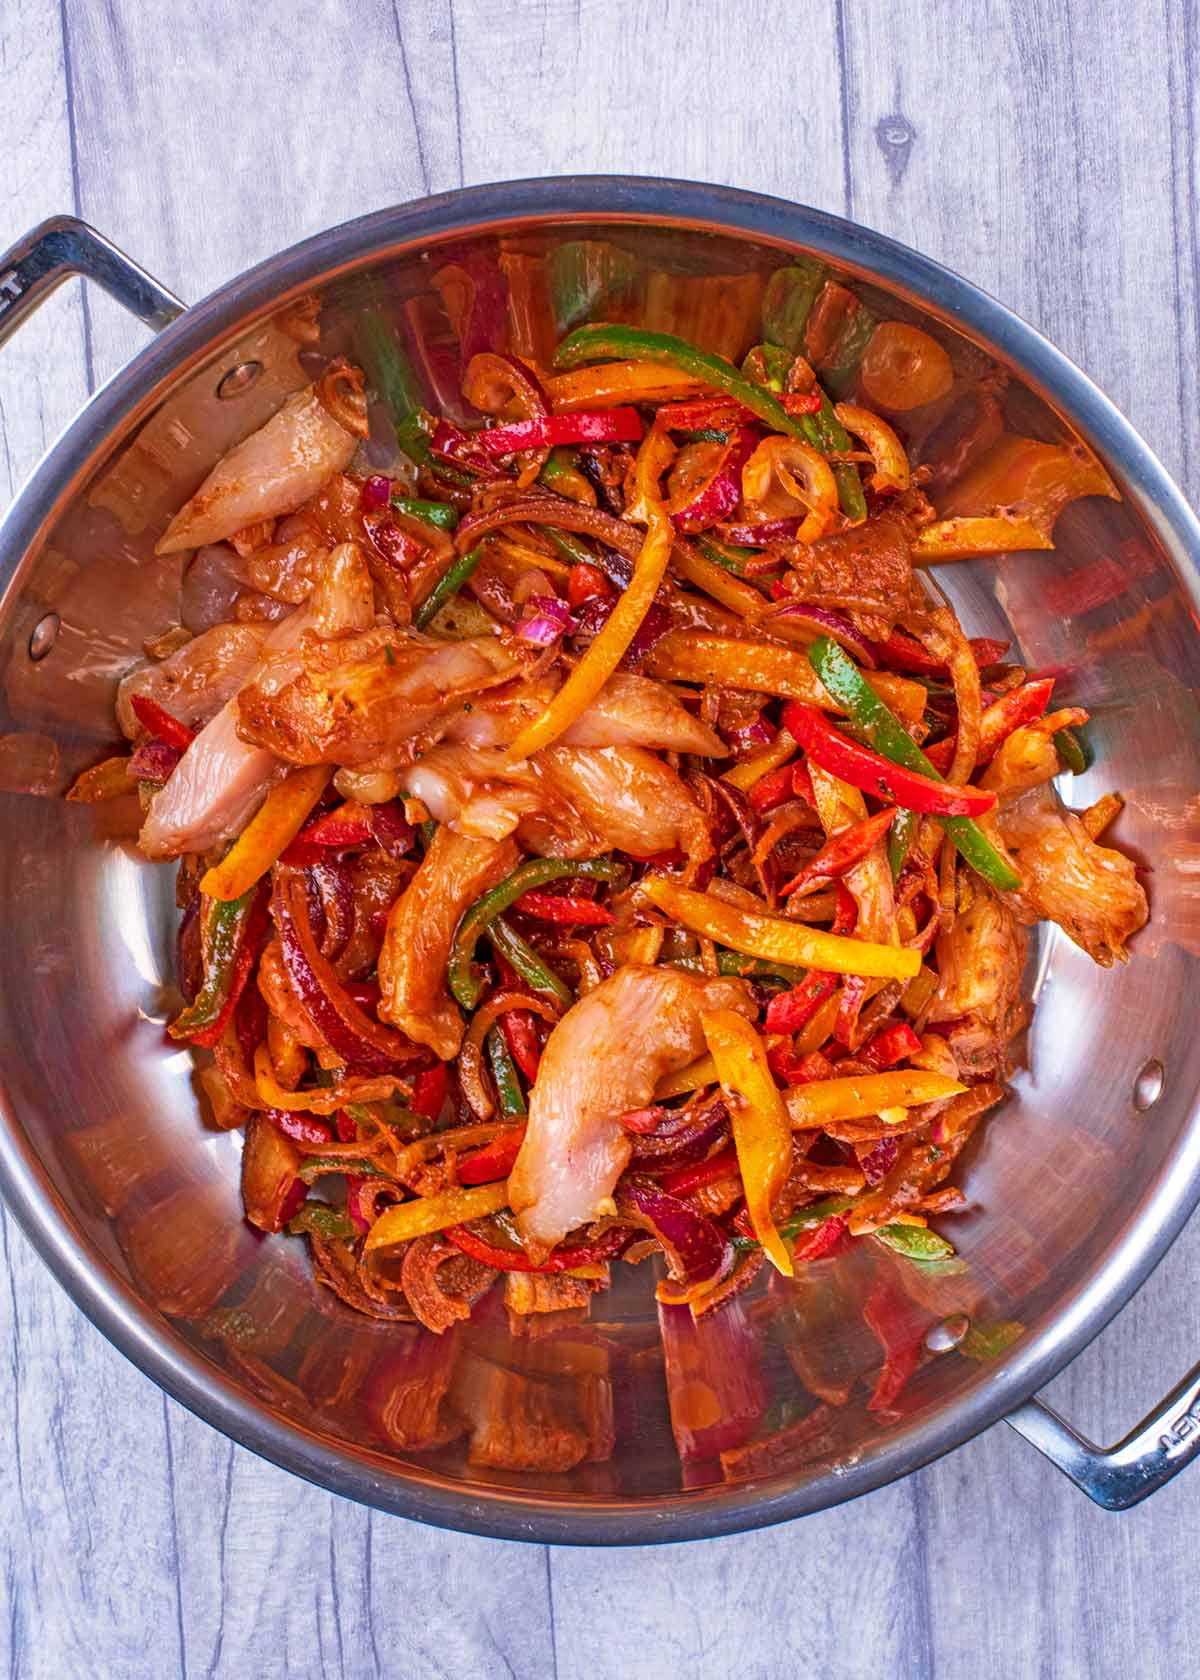 Raw marinated chicken and strips of pepper and onion in a large pan.